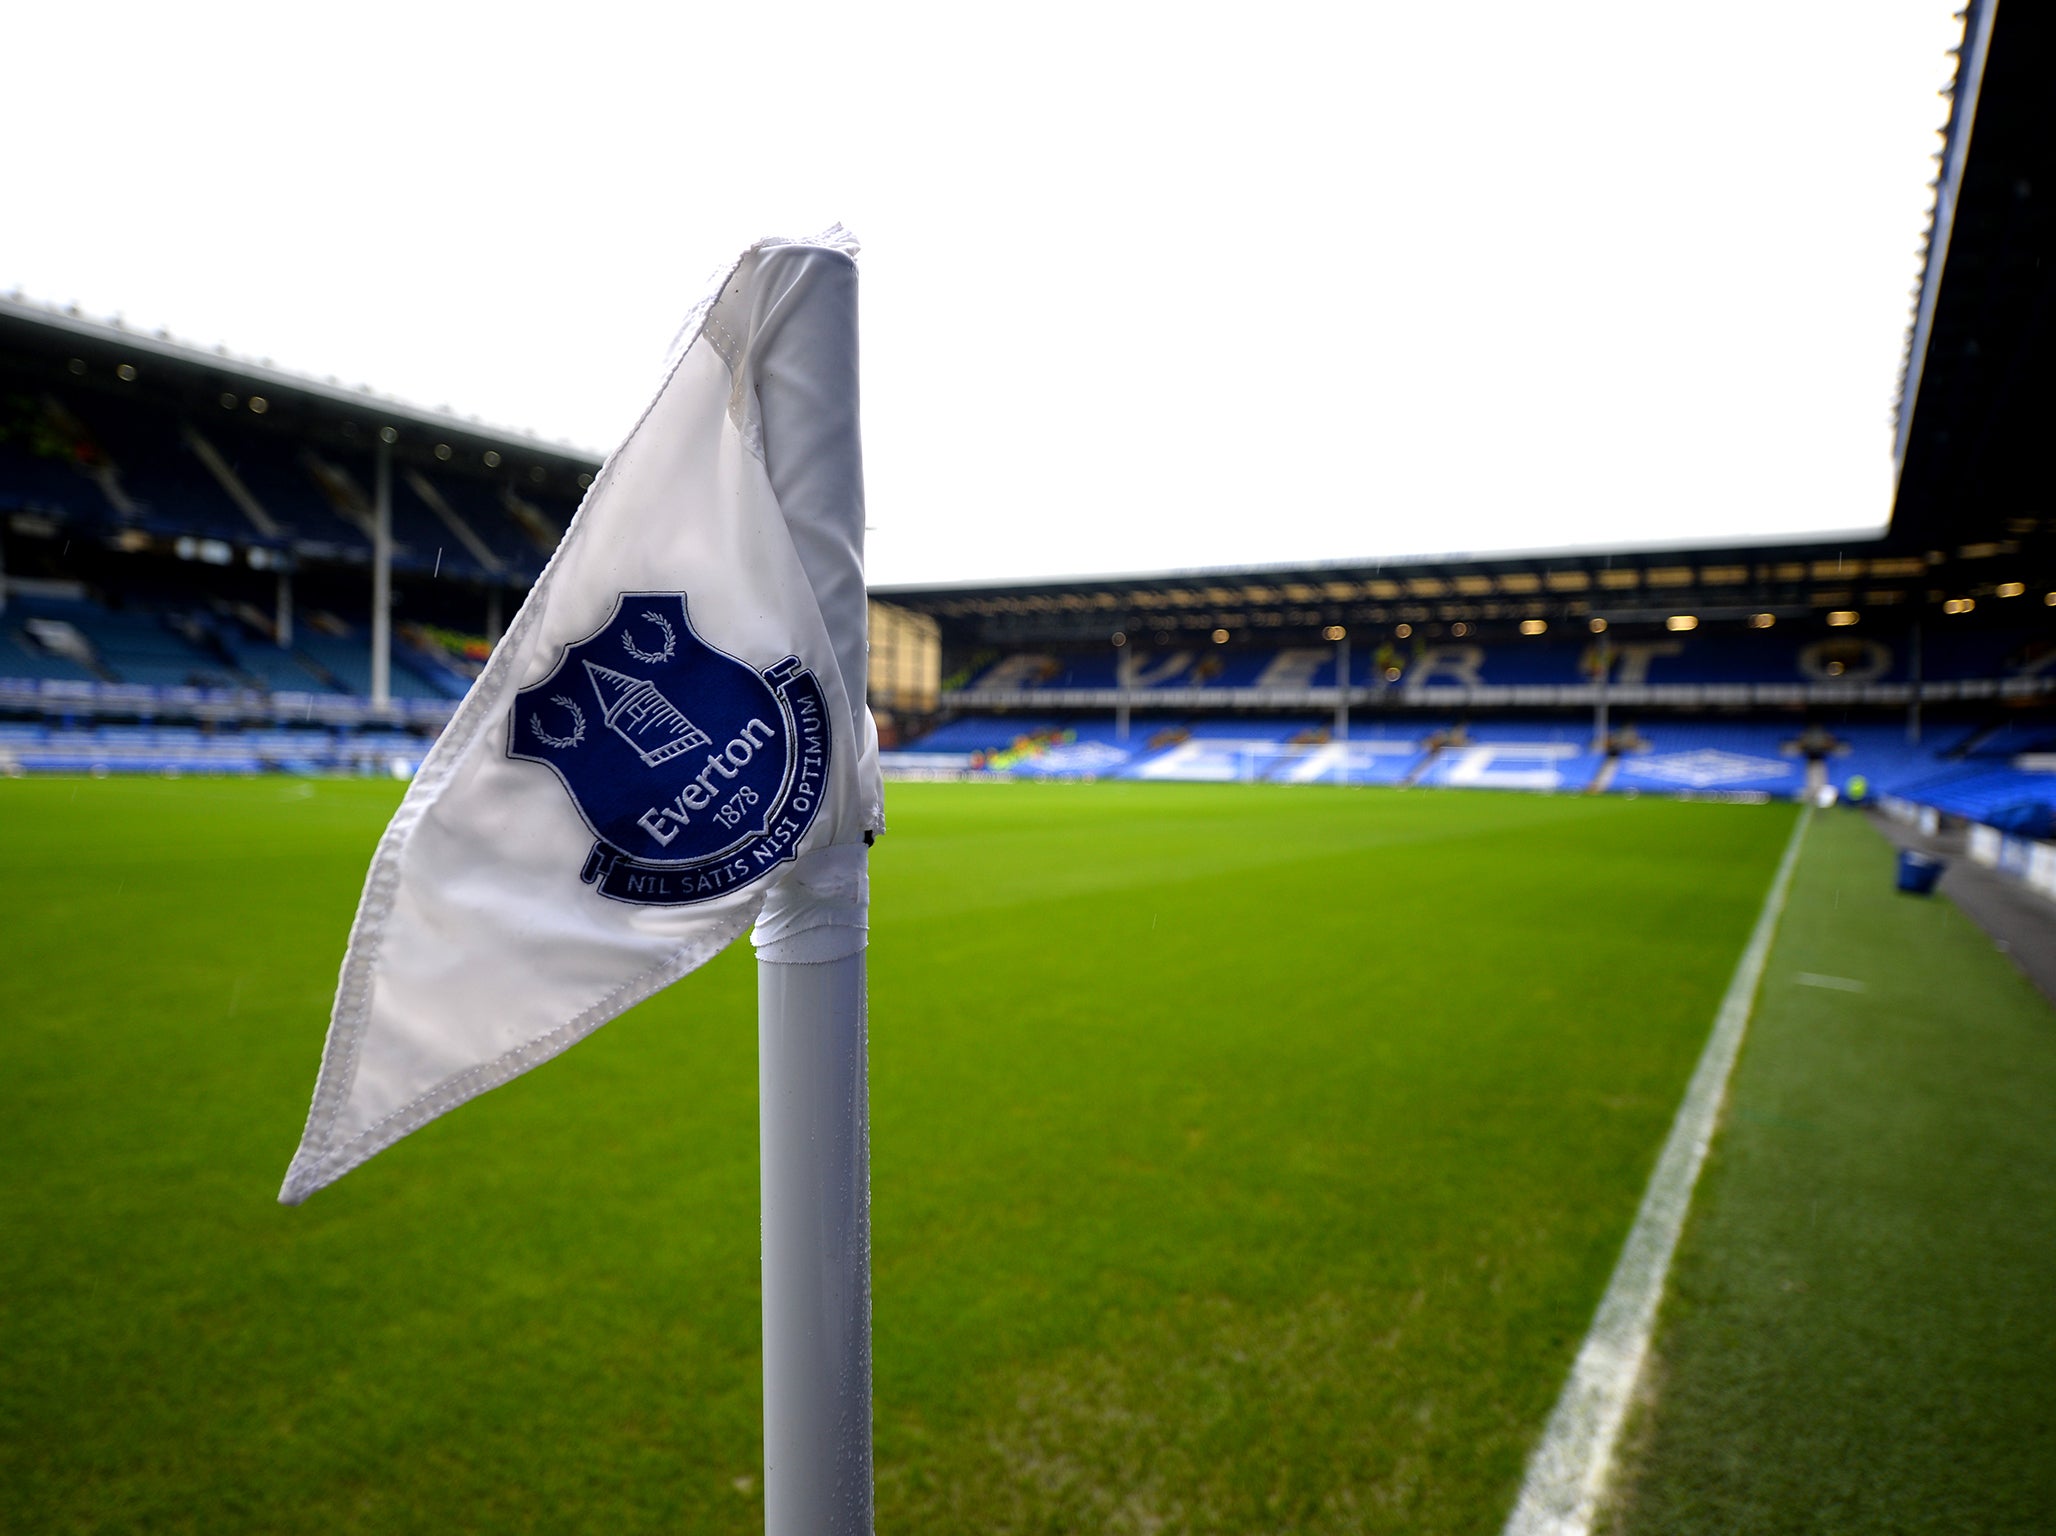 Everton have accepted the results of the investigation